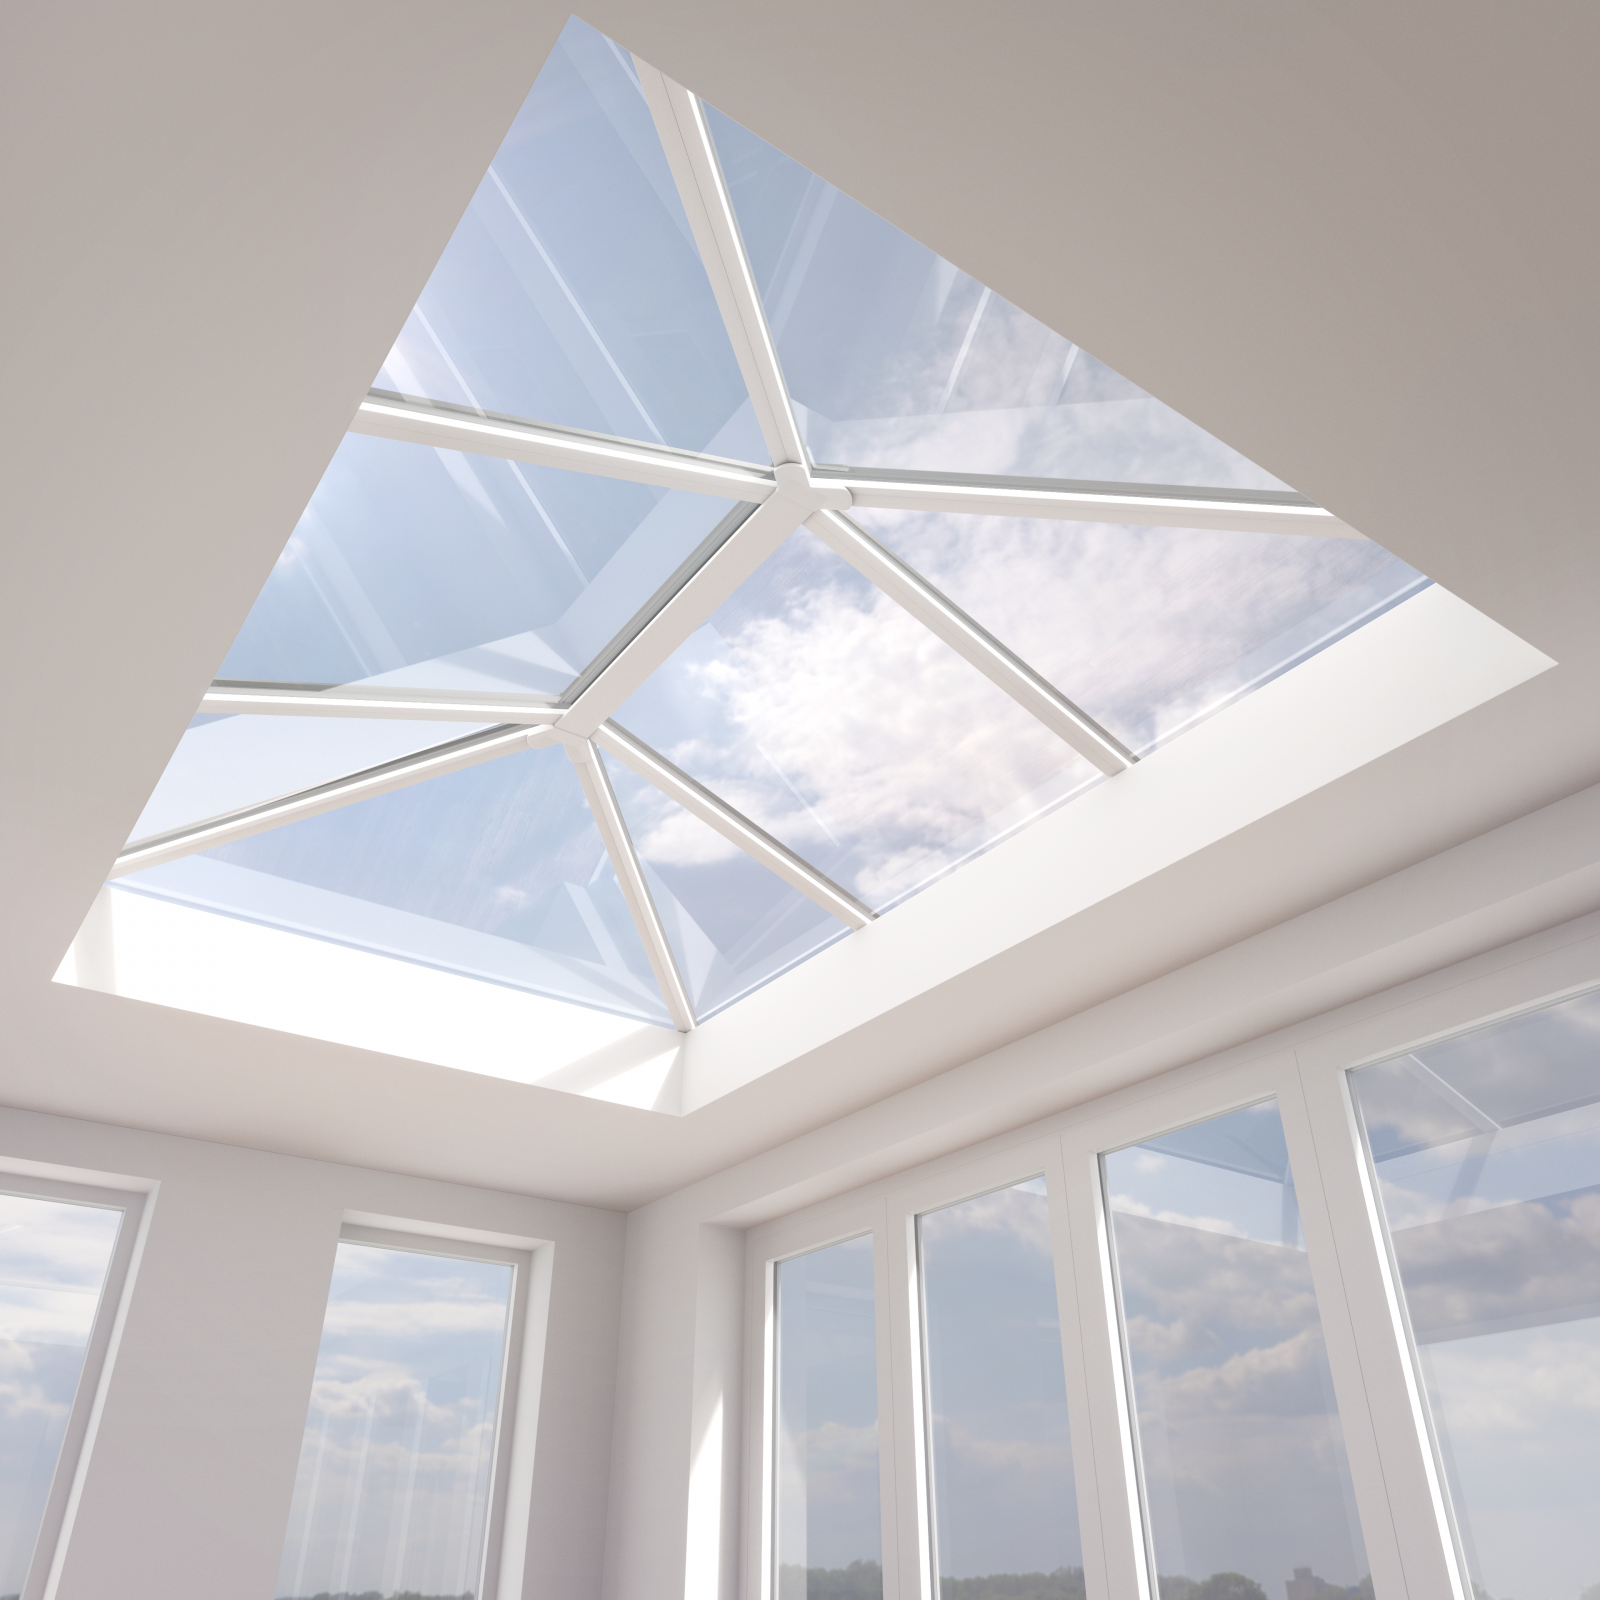 Stratus lantern roof from inside.